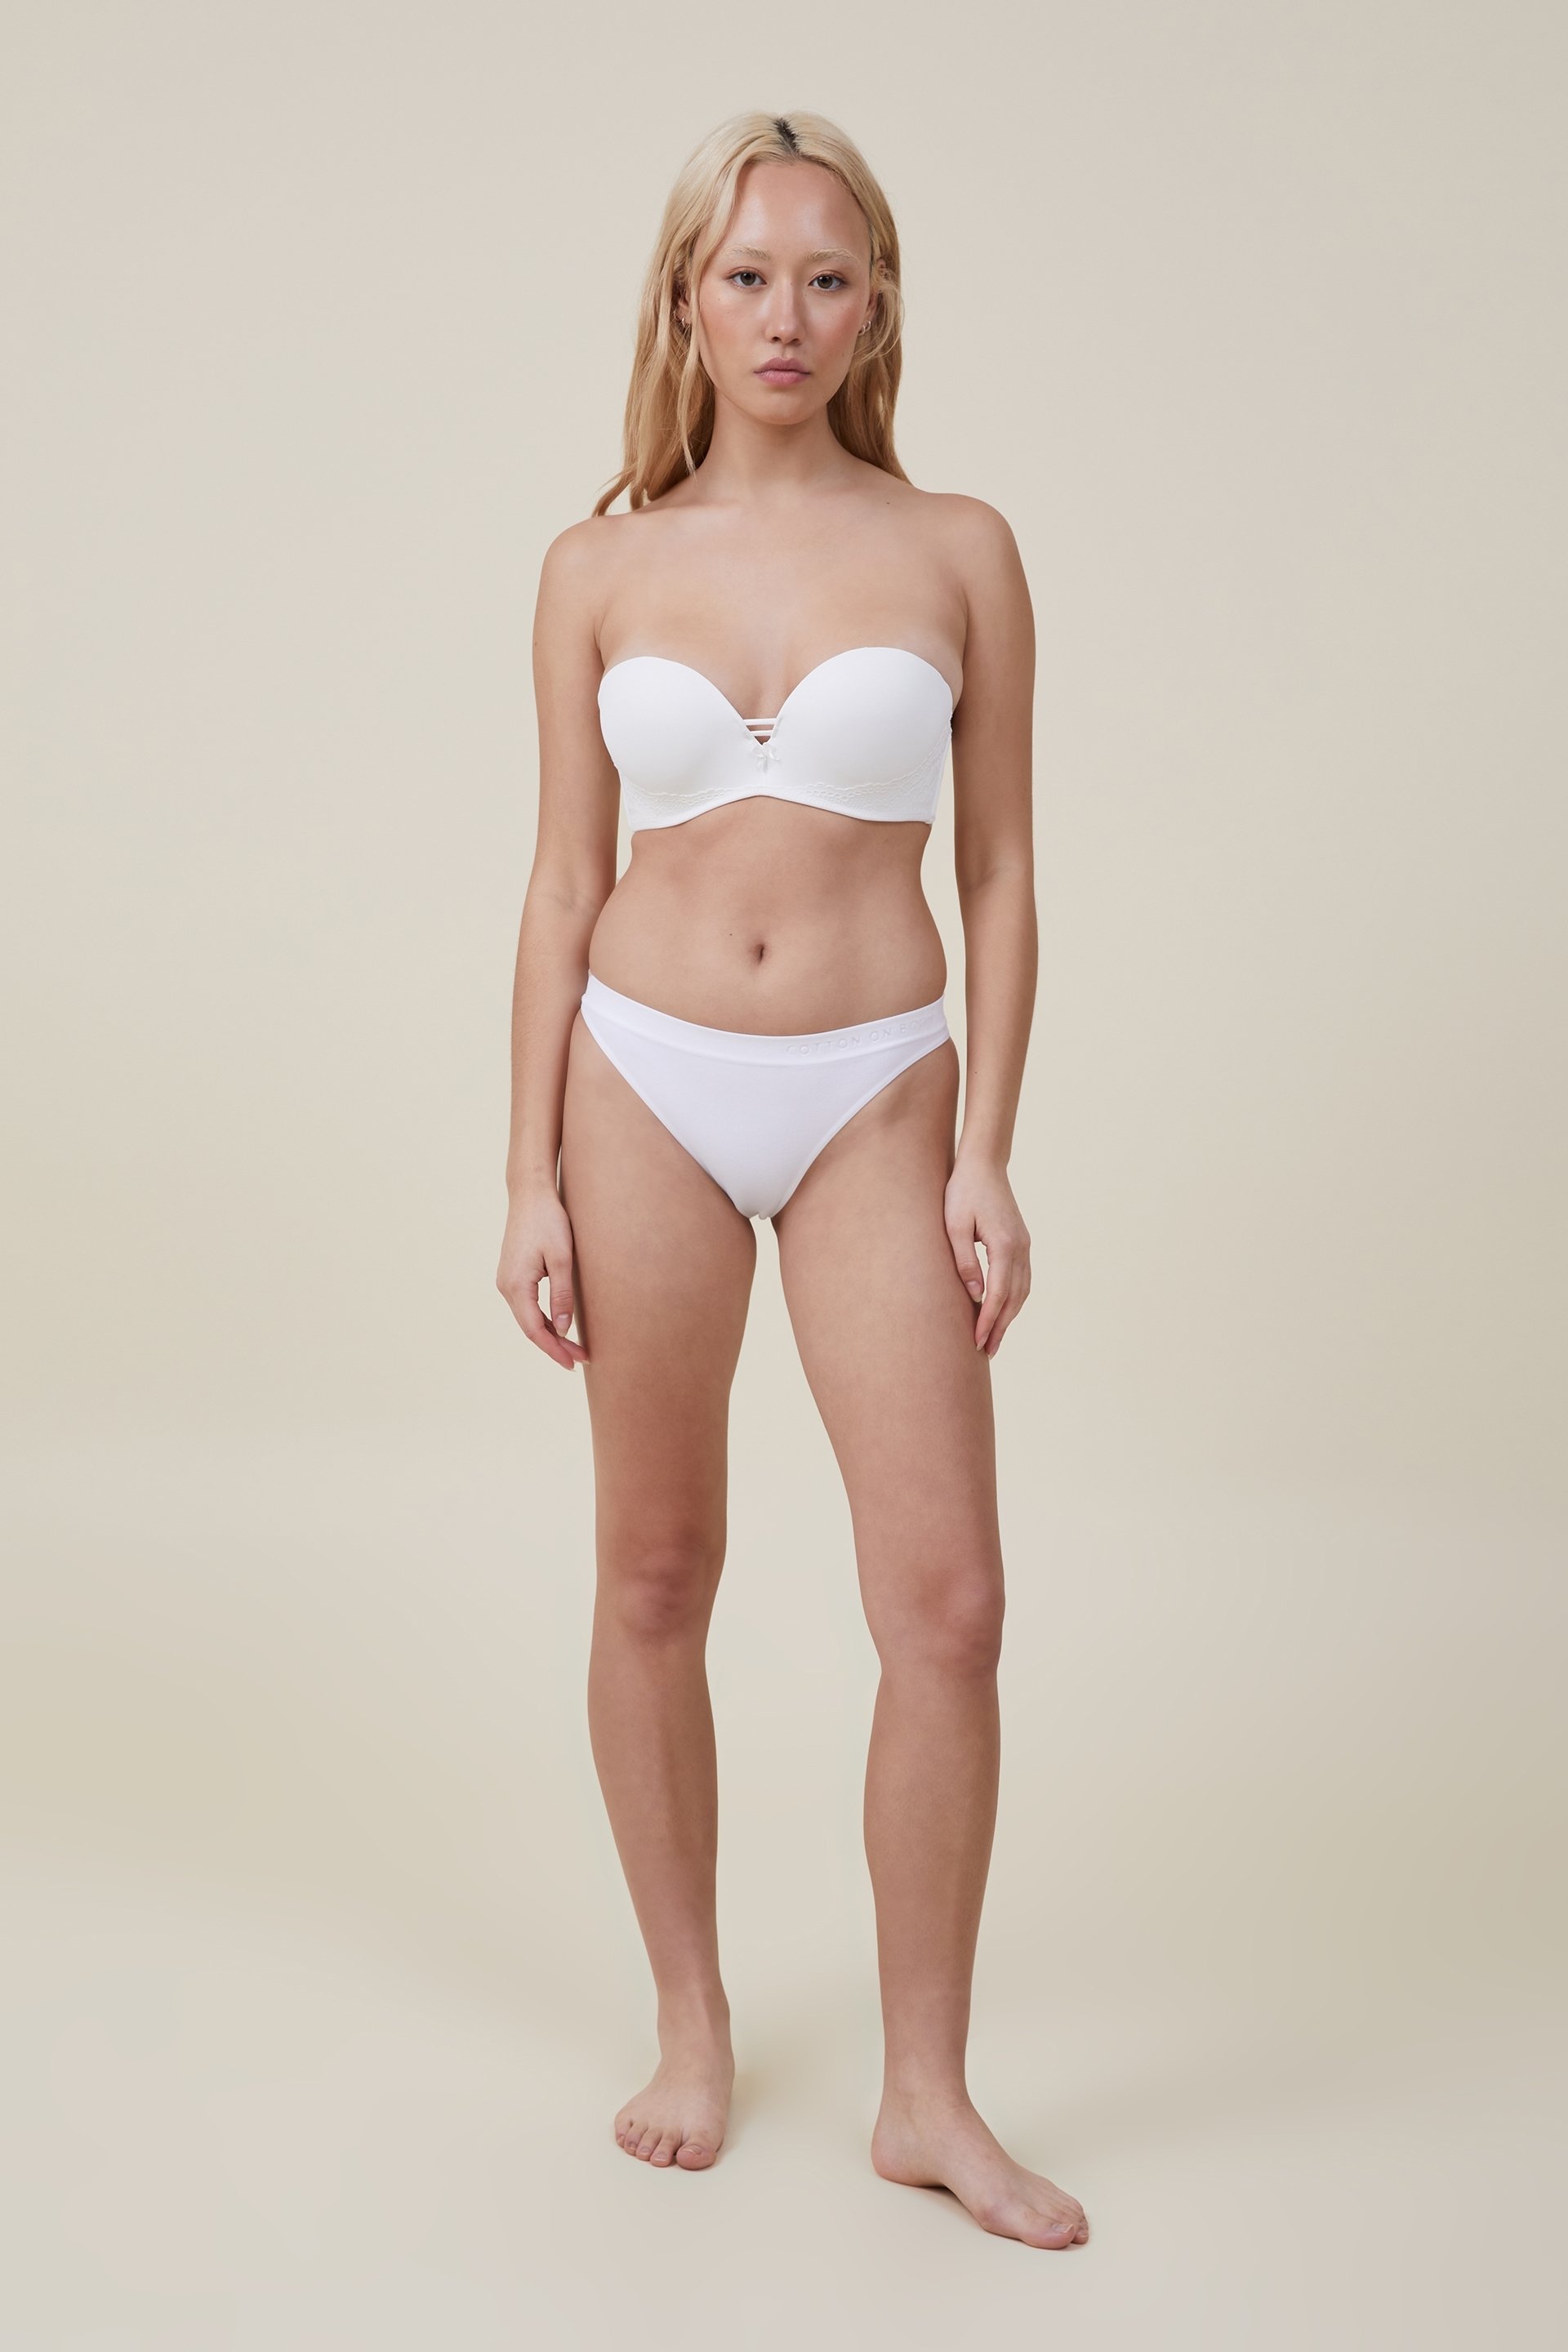 Charnos Superfit Lace Strapless Bra in Ivory FINAL SALE - Busted